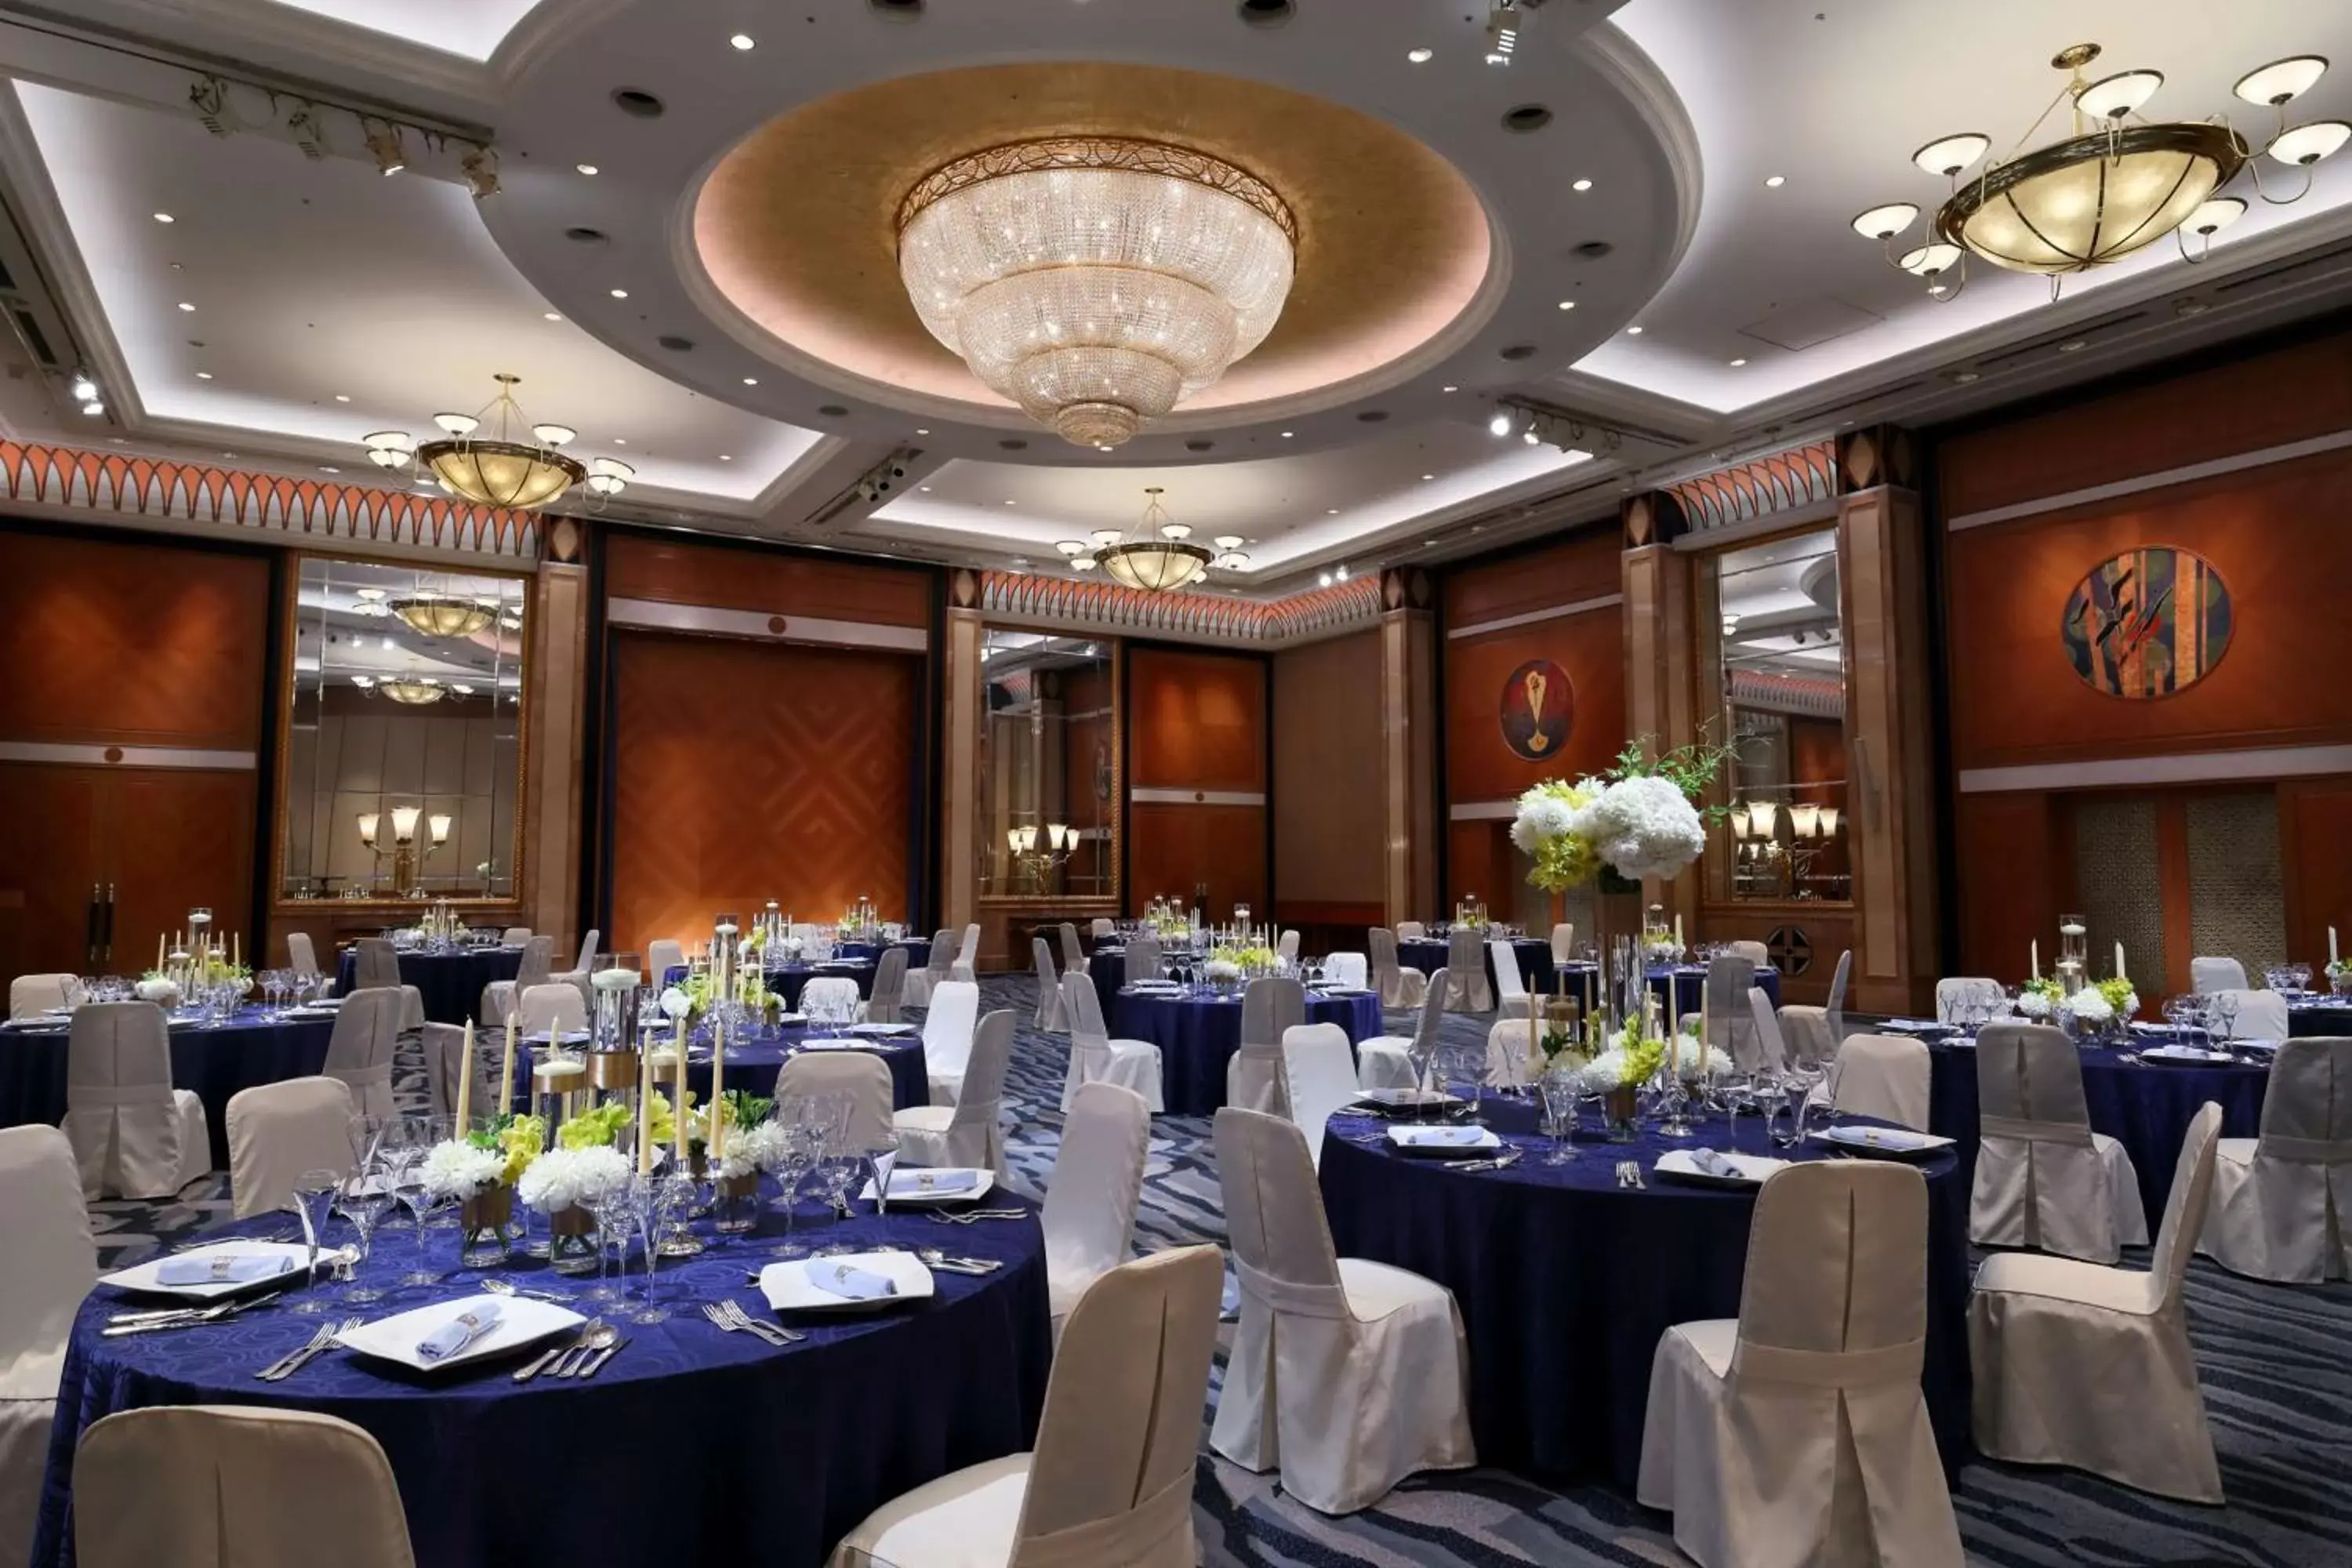 Meeting/conference room, Banquet Facilities in Hilton Nagoya Hotel